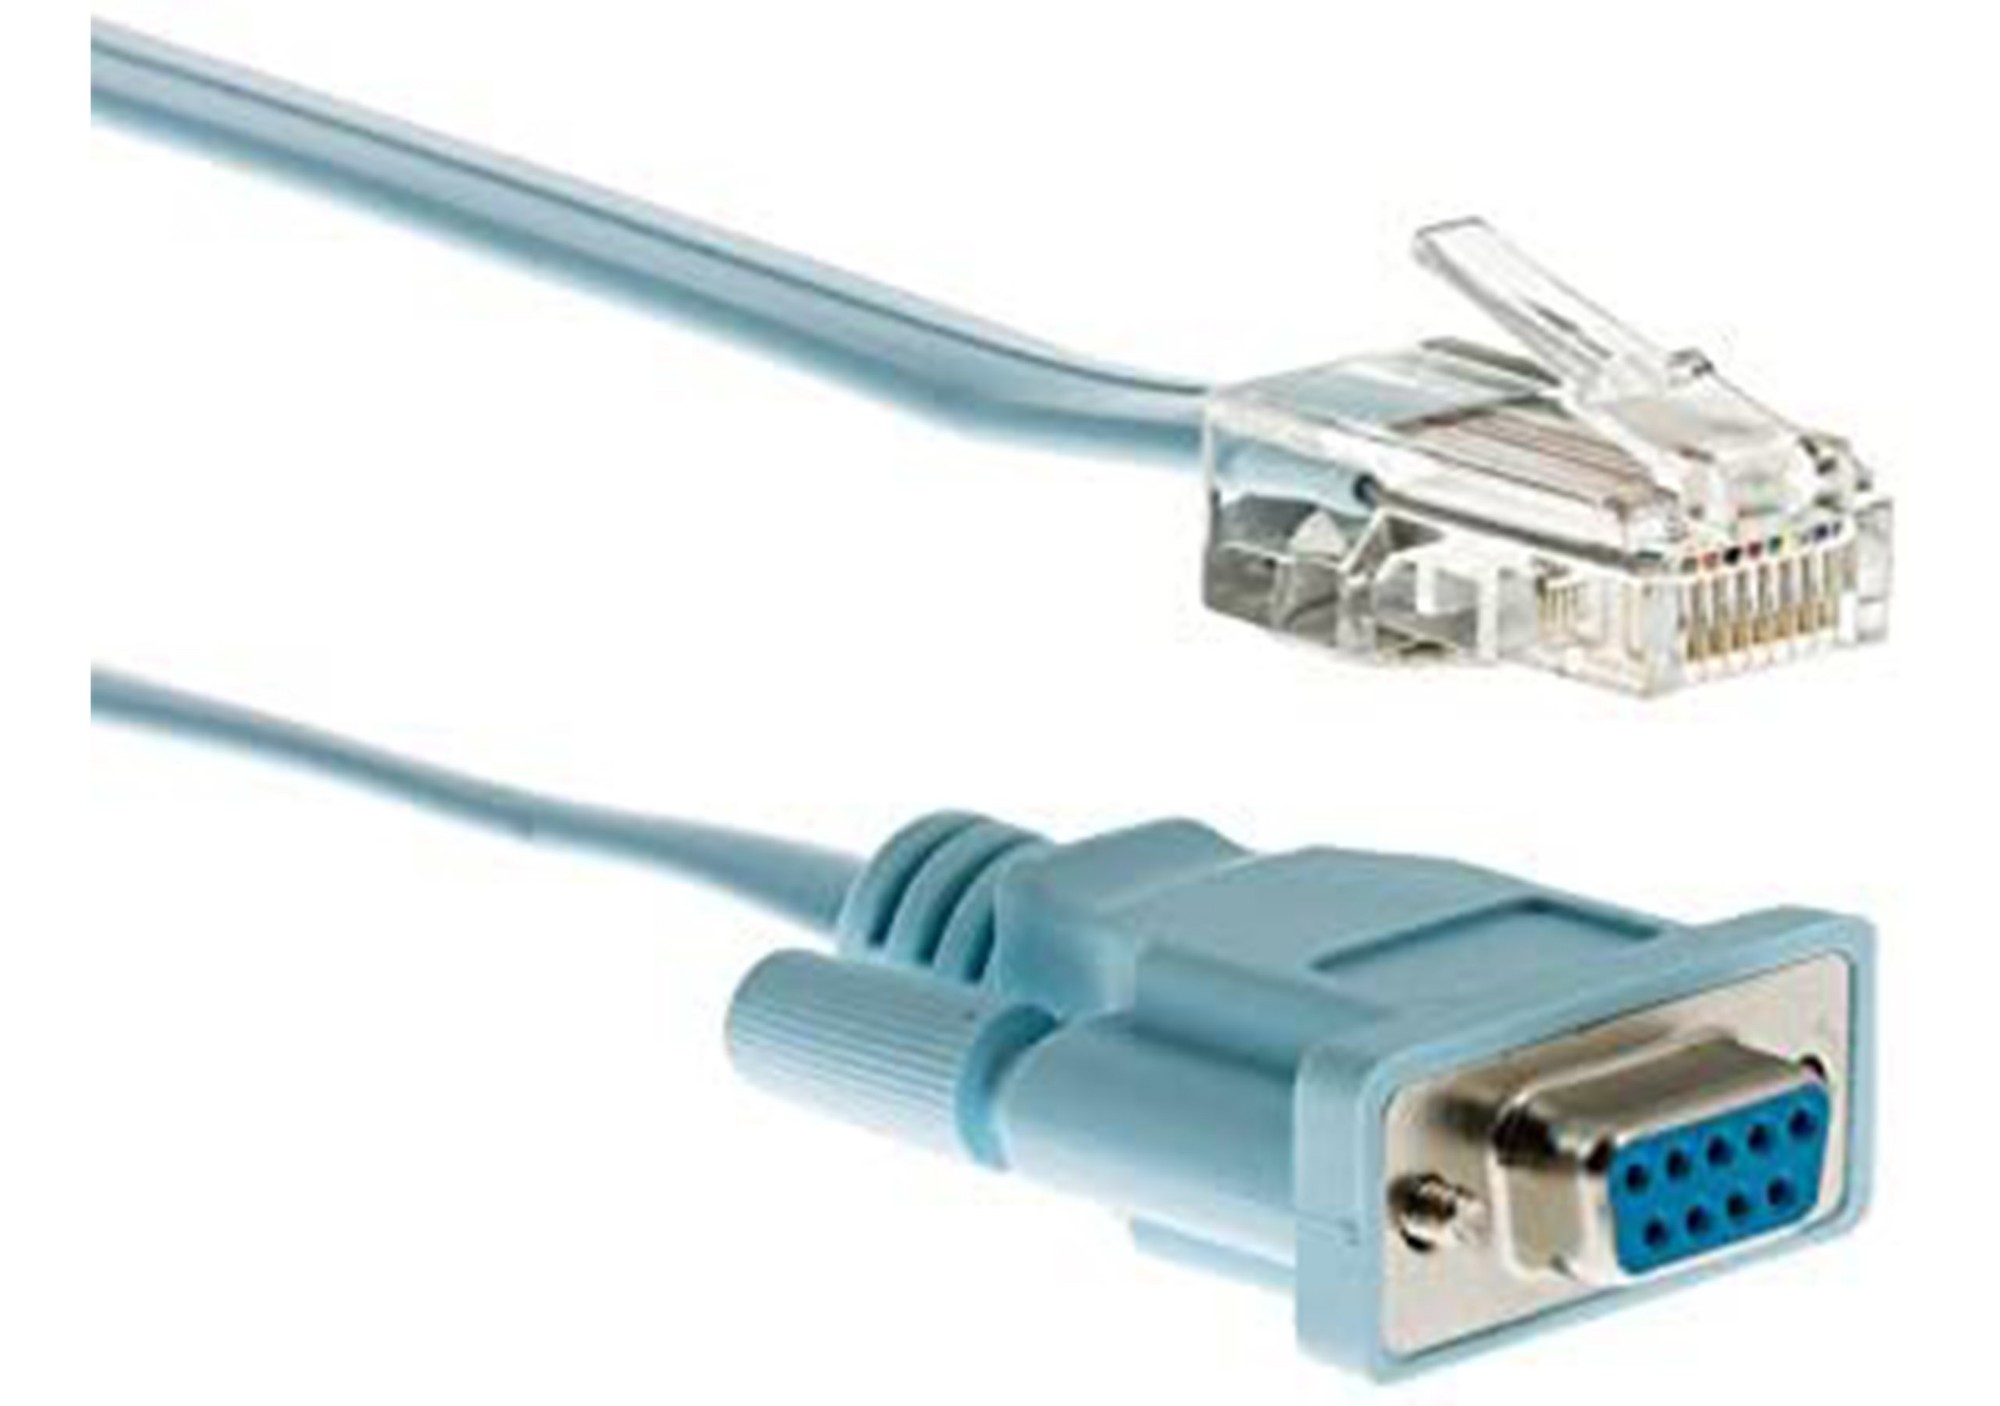 Photos - Cable (video, audio, USB) Cisco RJ-45 to DB9F Console Cable, 6 Feet, Compatible with 600, 800, 1 CAB 